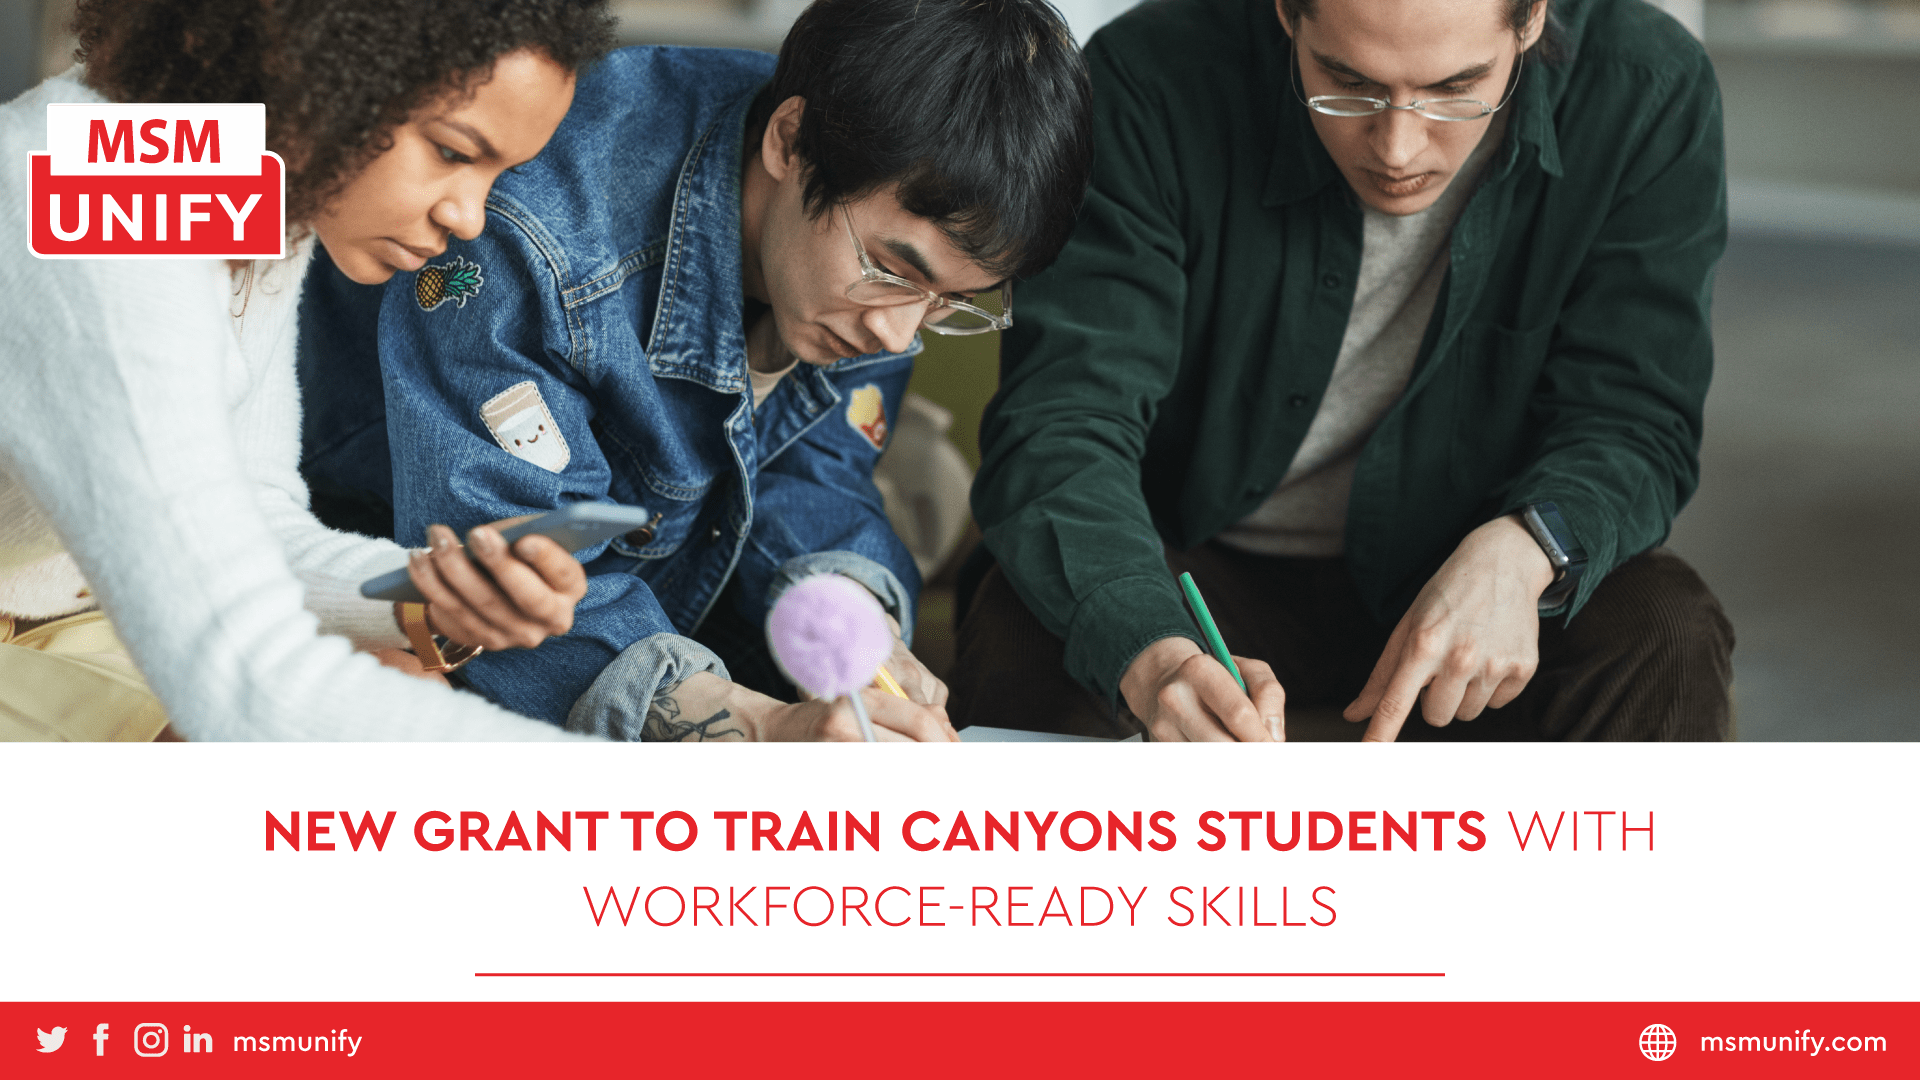 MSM Unify New Grant to Train Canyons Students With Workforce Ready Skills min